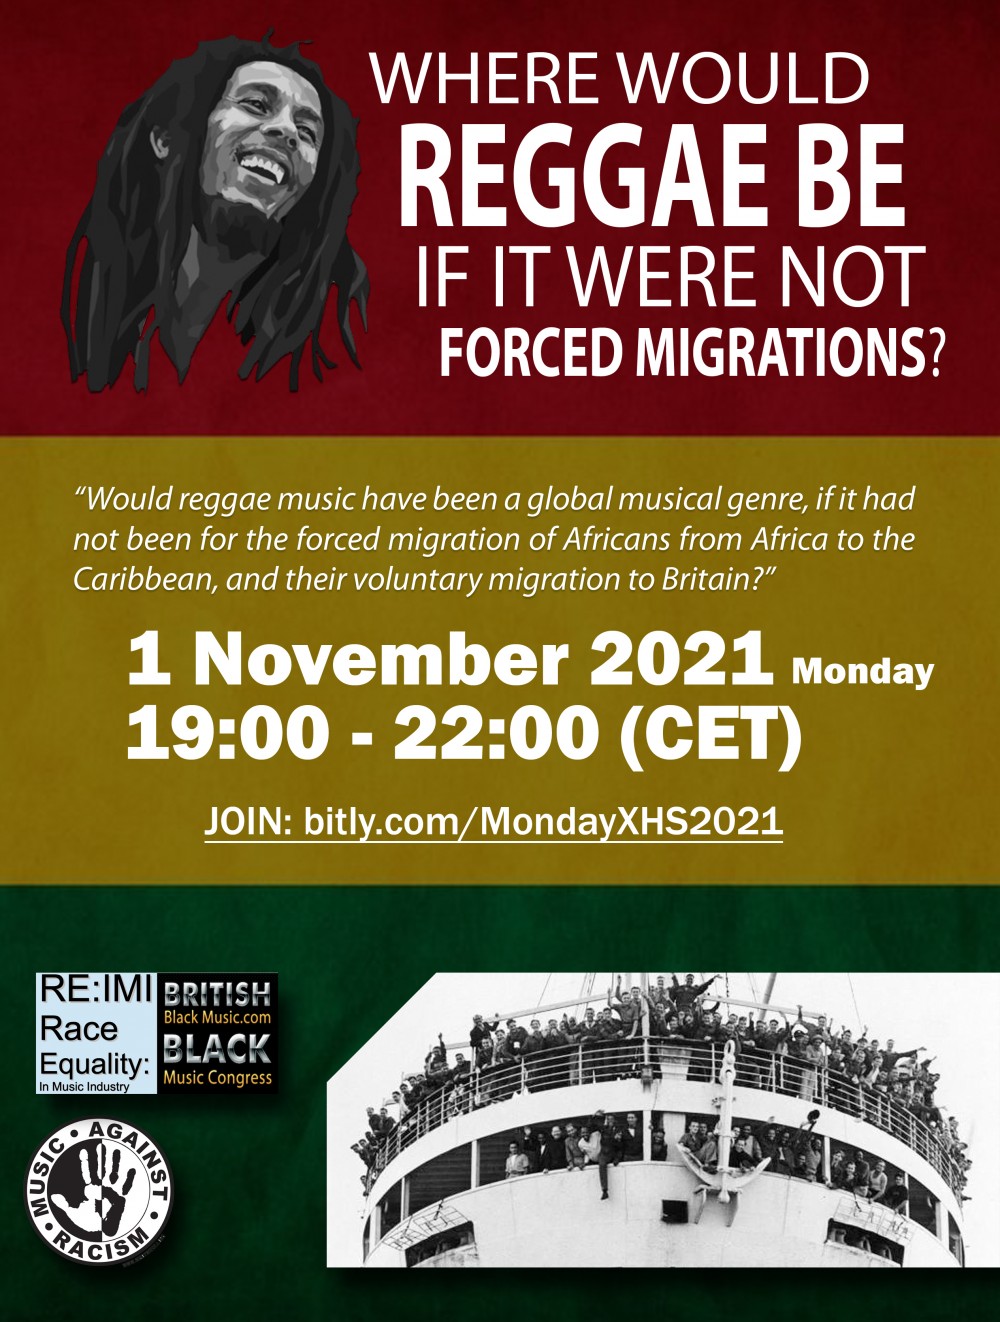 WHERE WOULD REGGAE BE IF IT WERE NOT FOR MIGRATION?